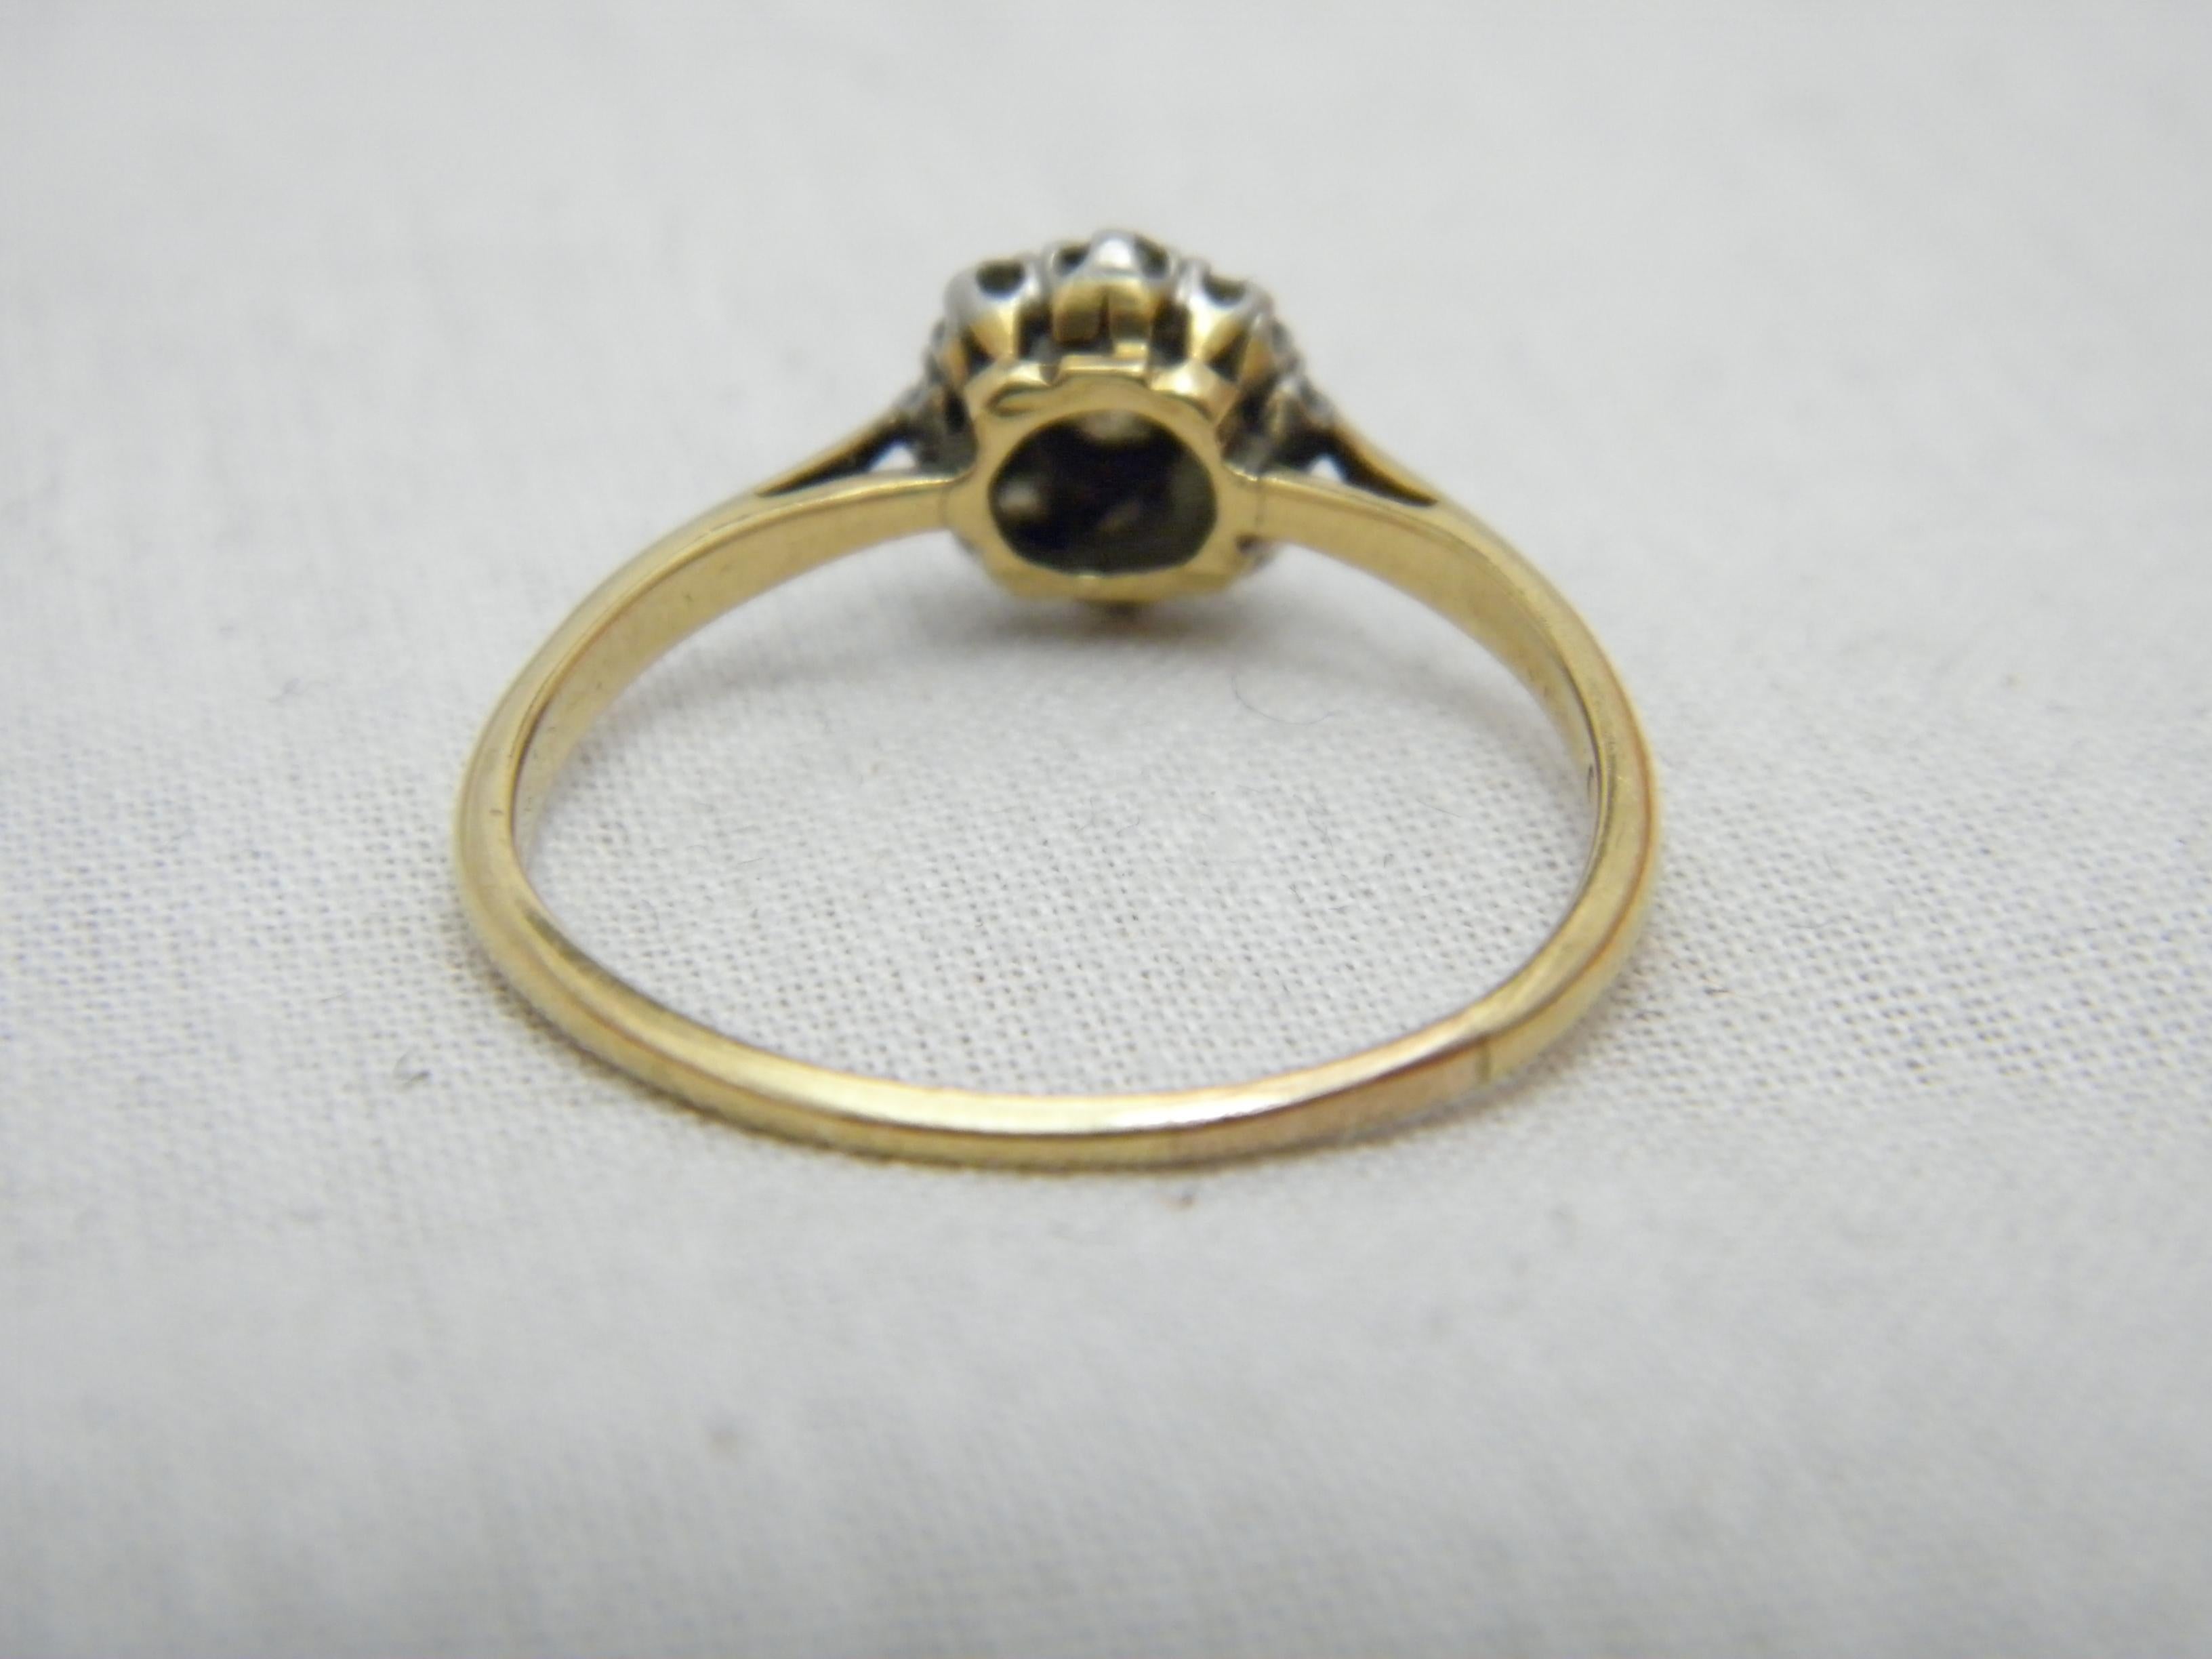 Antique 18ct Gold Platinum Diamond Cluster Gypsy Ring 750 950 Purity In Good Condition For Sale In Camelford, GB